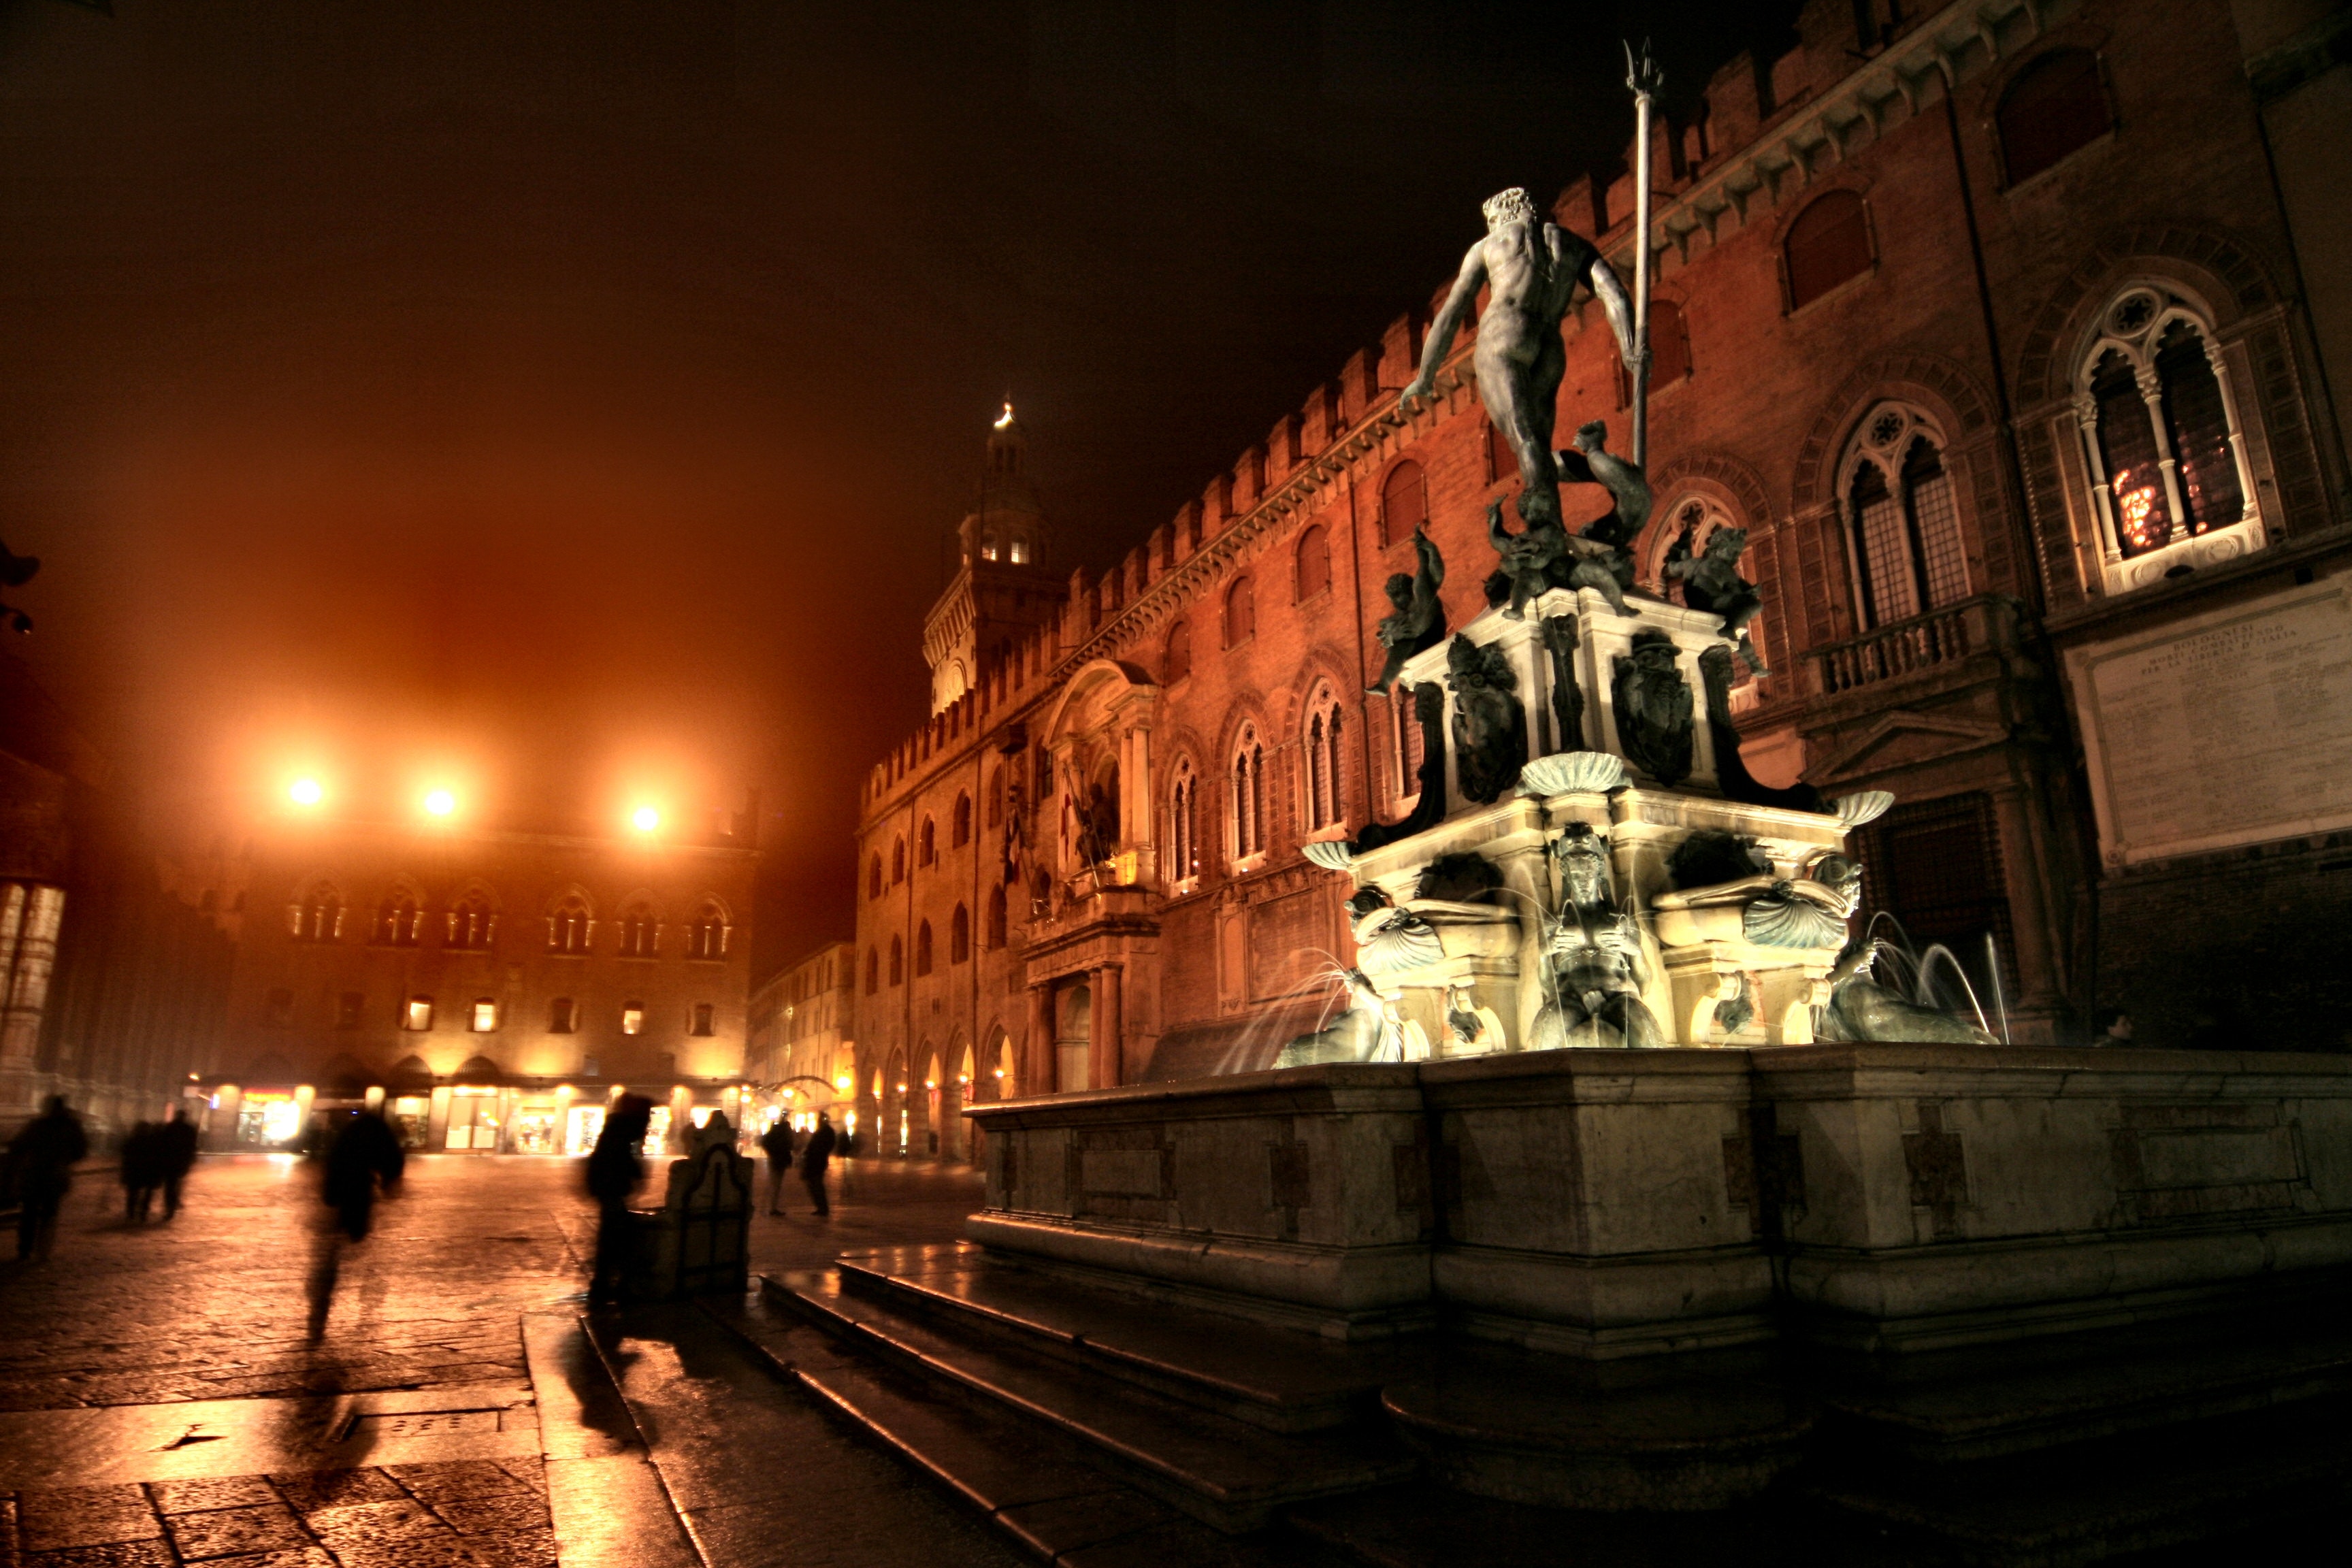 Monument with water fountain during nighttime photo